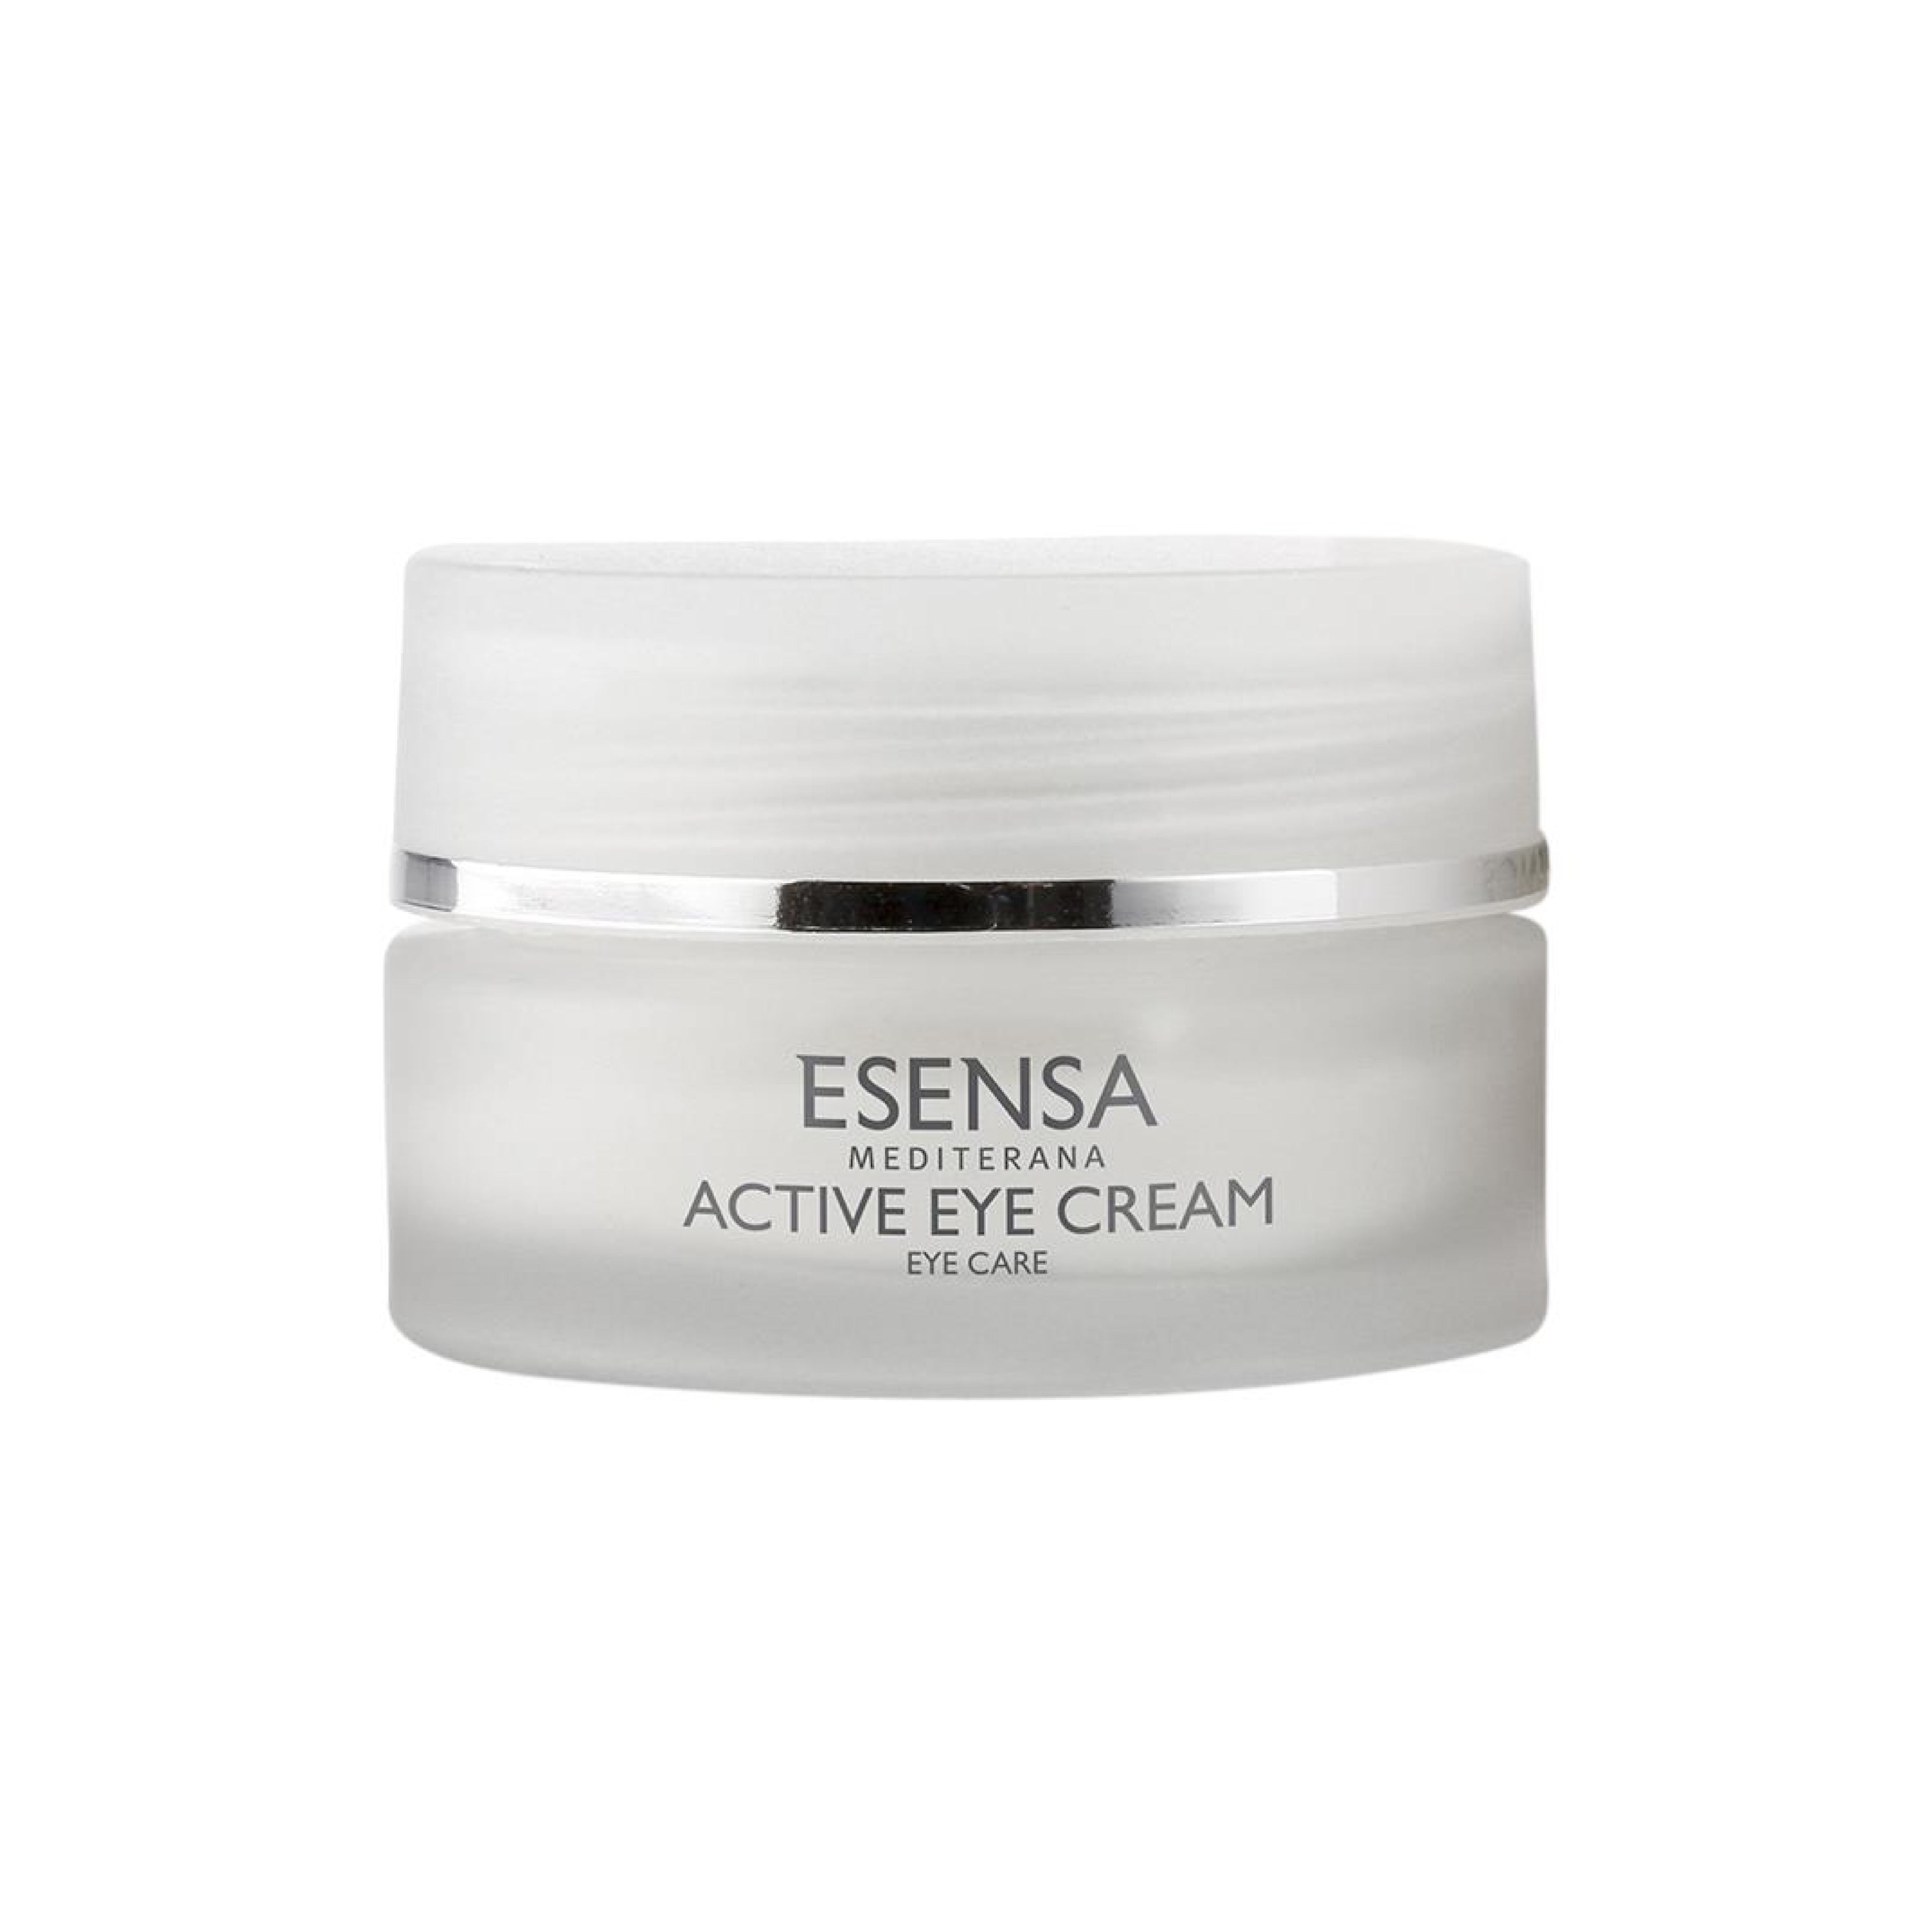 Active Eye Cream │ Cream for wrinkles and swellings